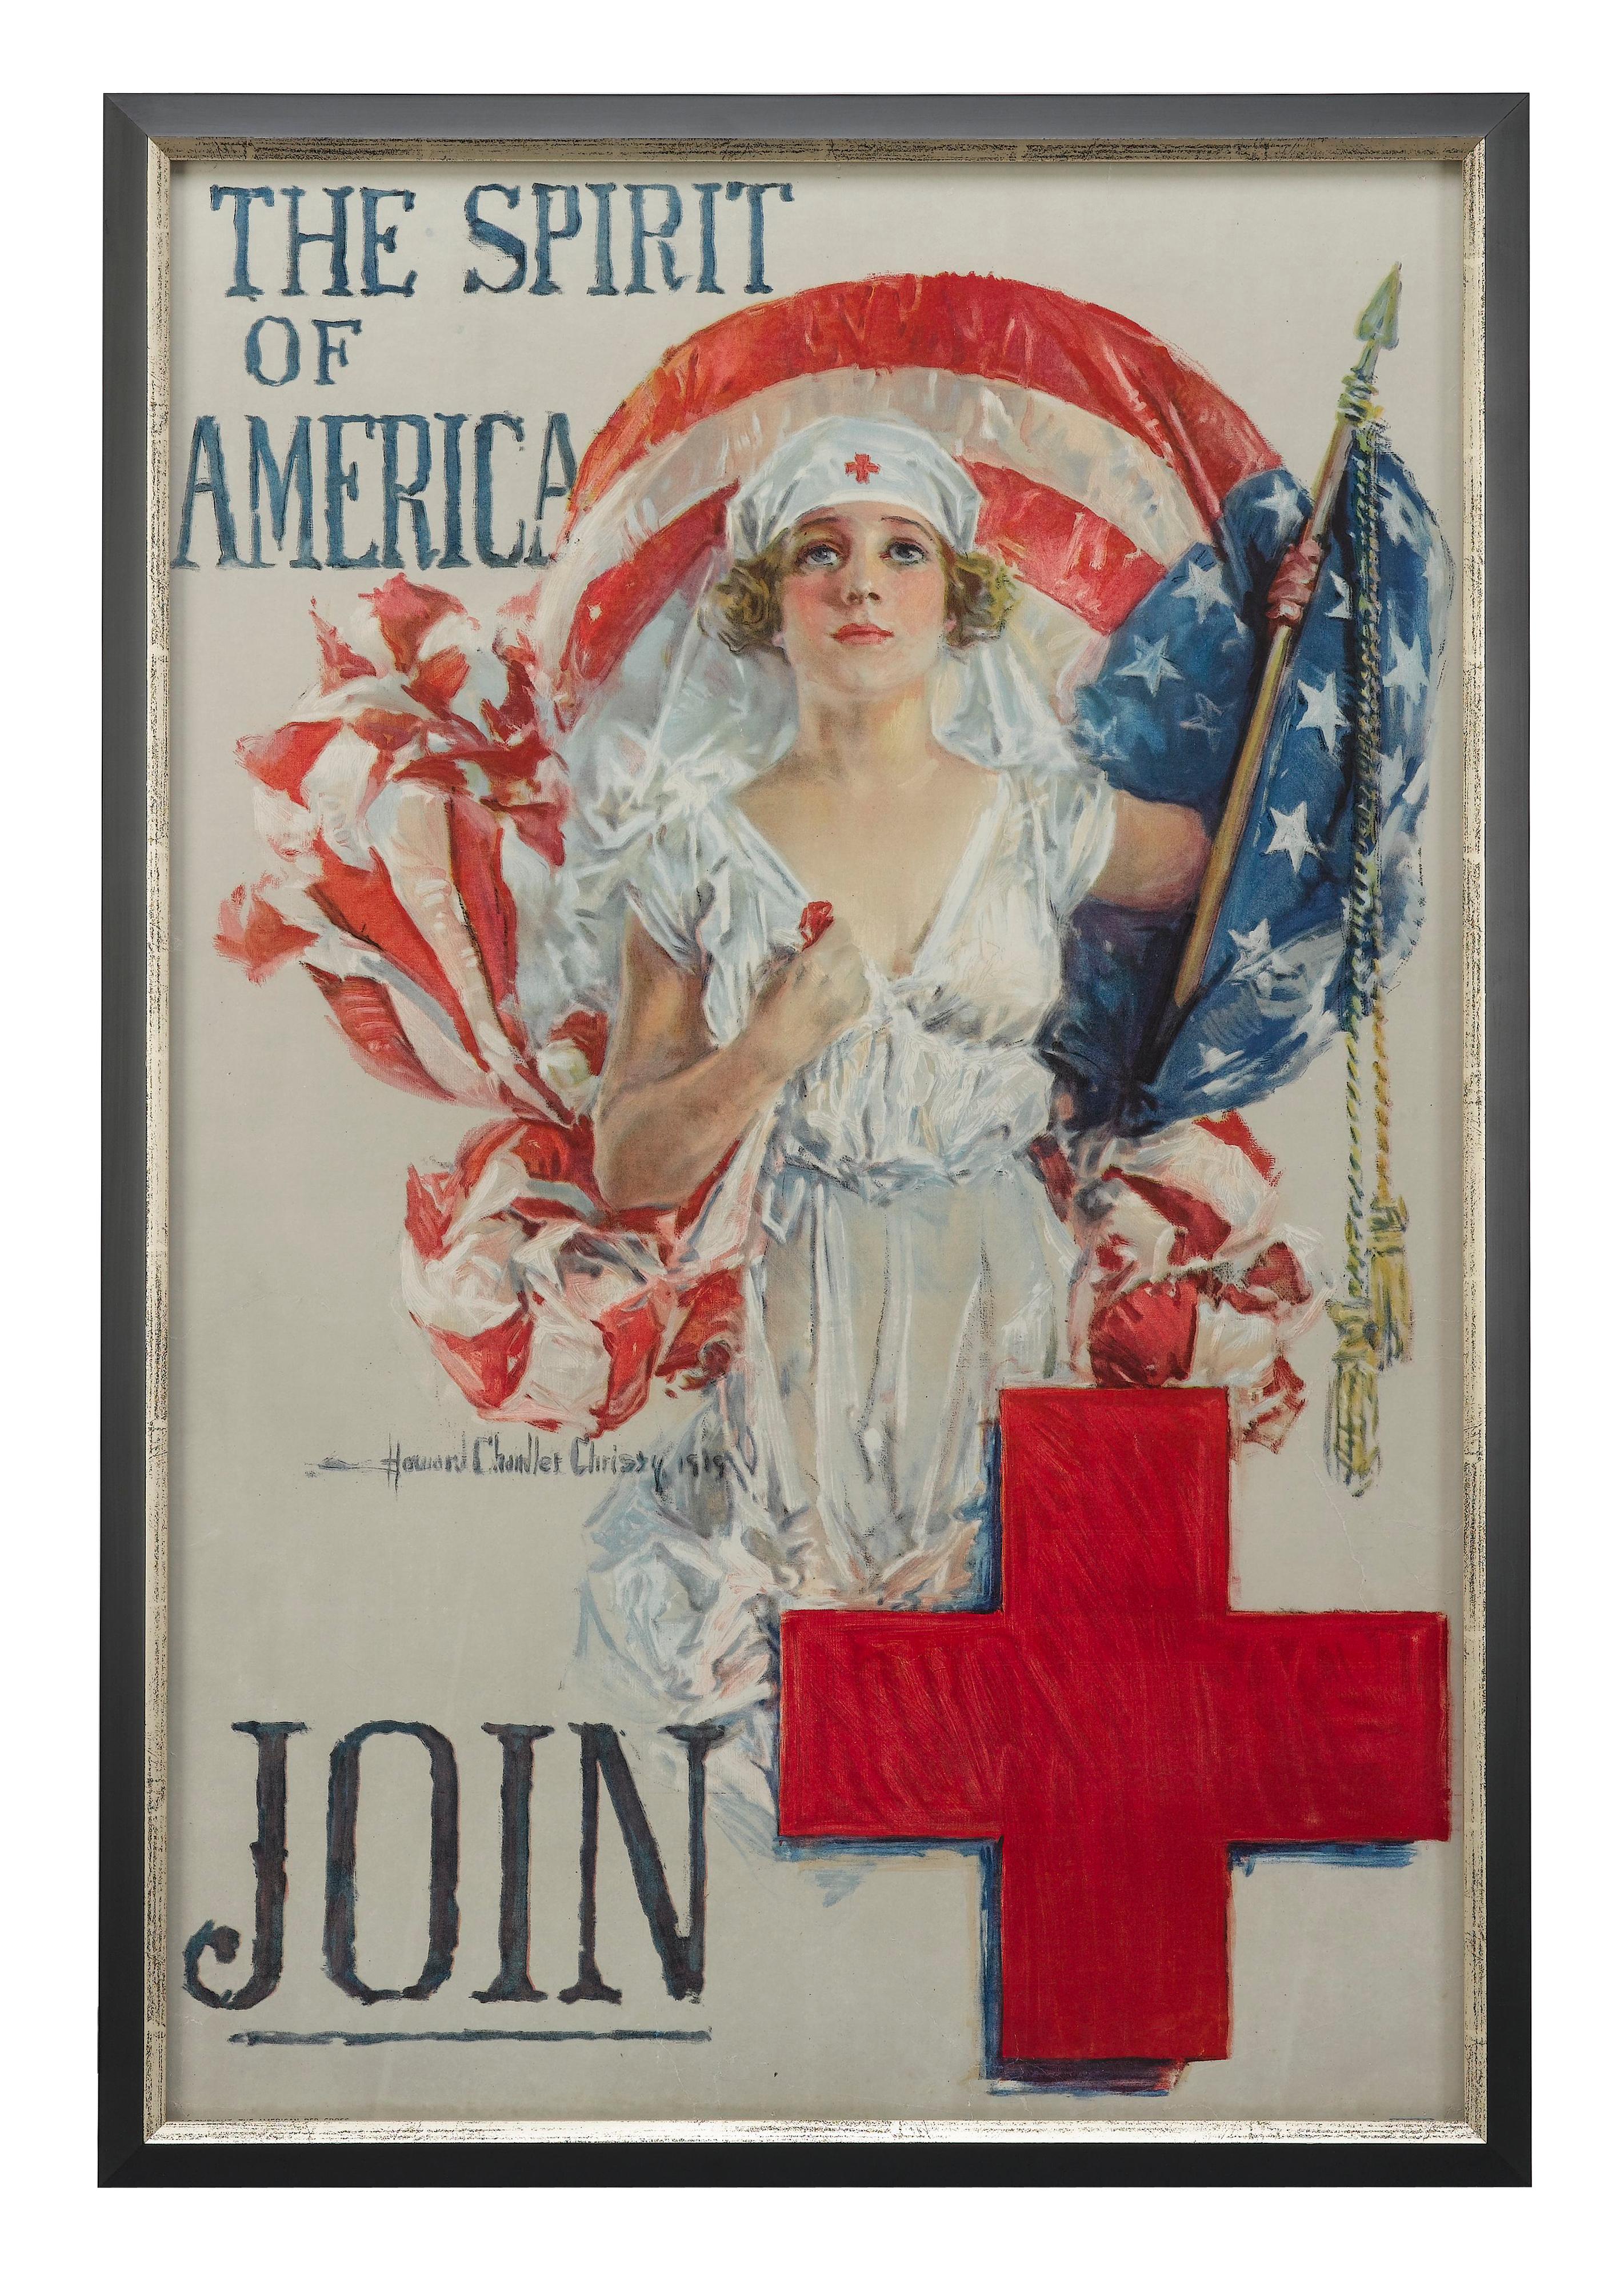 Presented is a vintage Red Cross Recruitment poster from WWI. The work was designed by famous artist Howard Chandler Christy in 1919 and was printed in Boston by Forbes Litho. In the composition, a young nurse proudly carries the American flag,